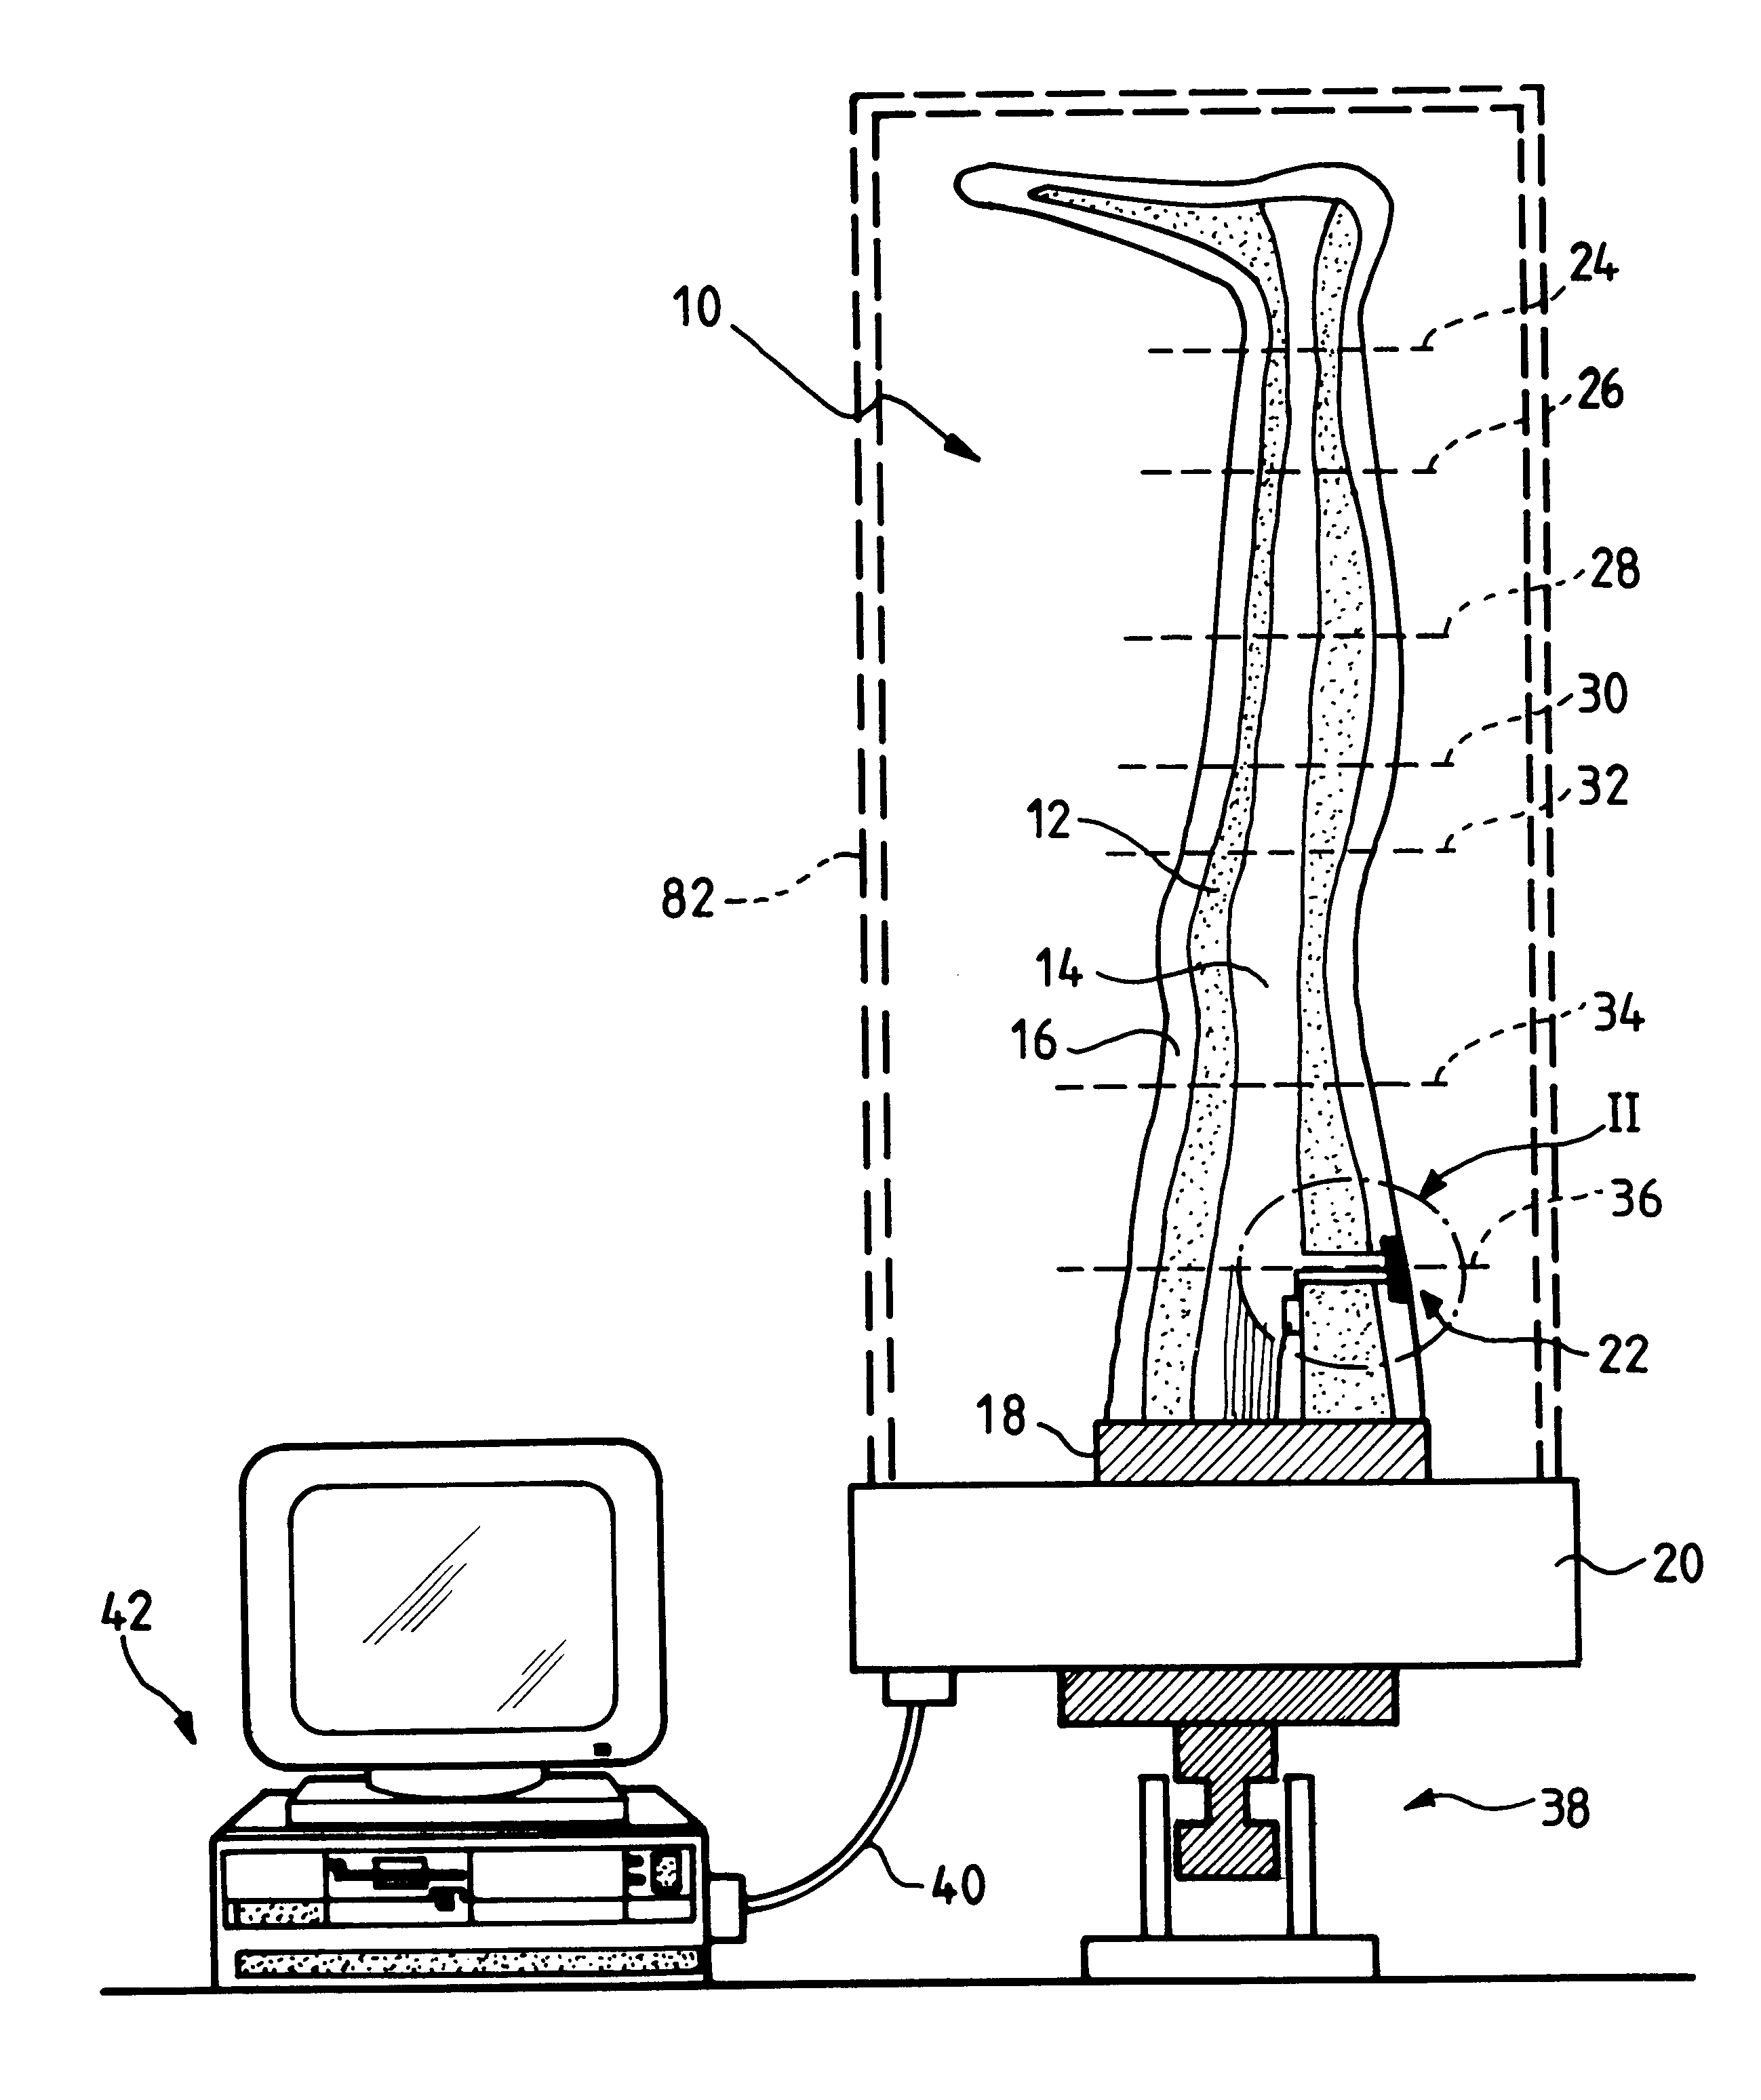 Device for measuring pressure points to be applied by a compressive orthotic device